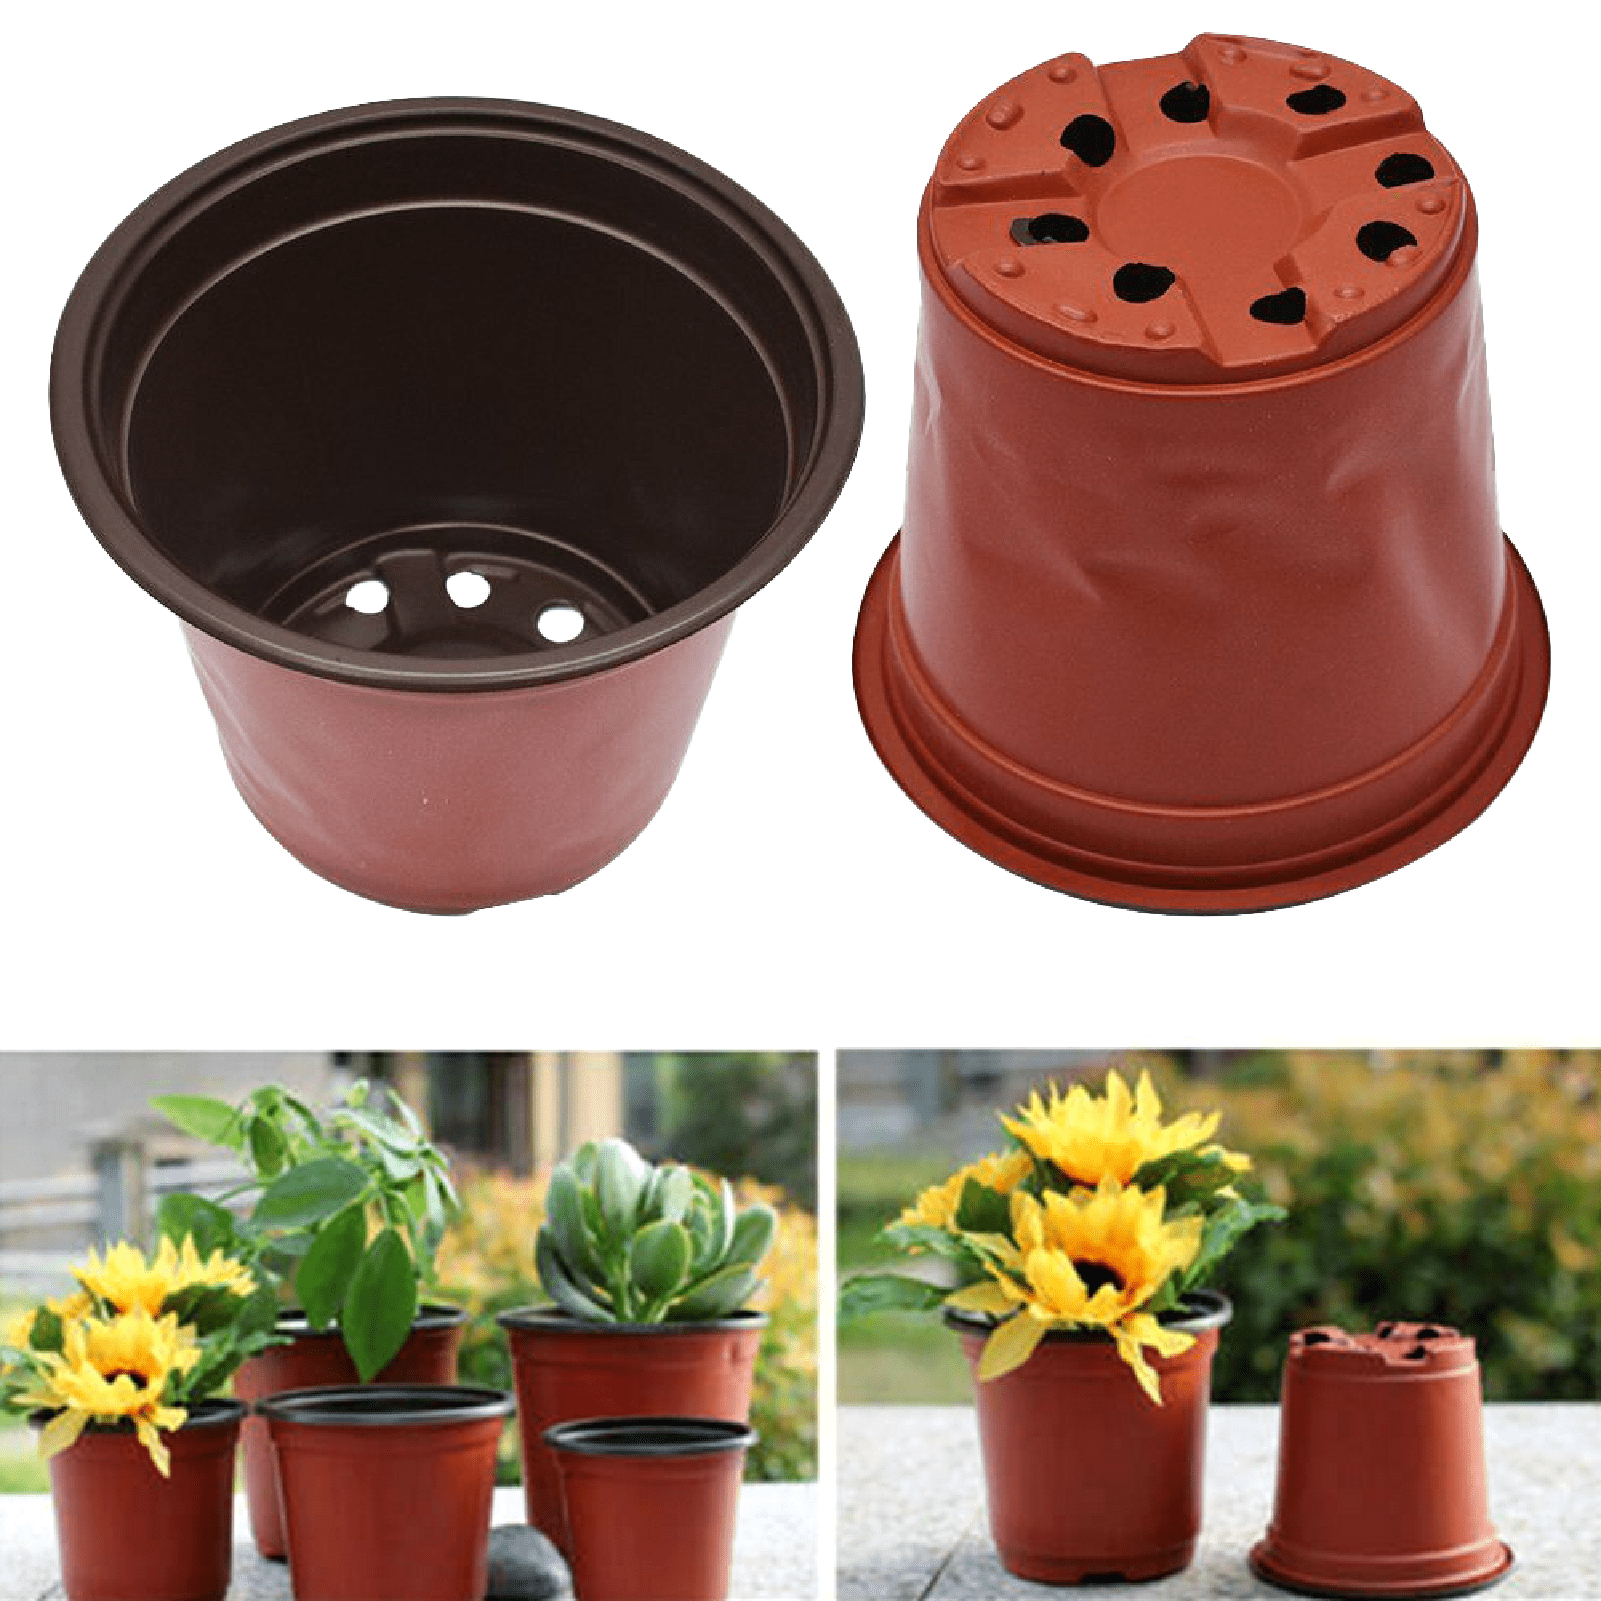 4-Sided Pot 25 x 25 x 26cm Plant Pots Flower Container Grow Hydro Square 